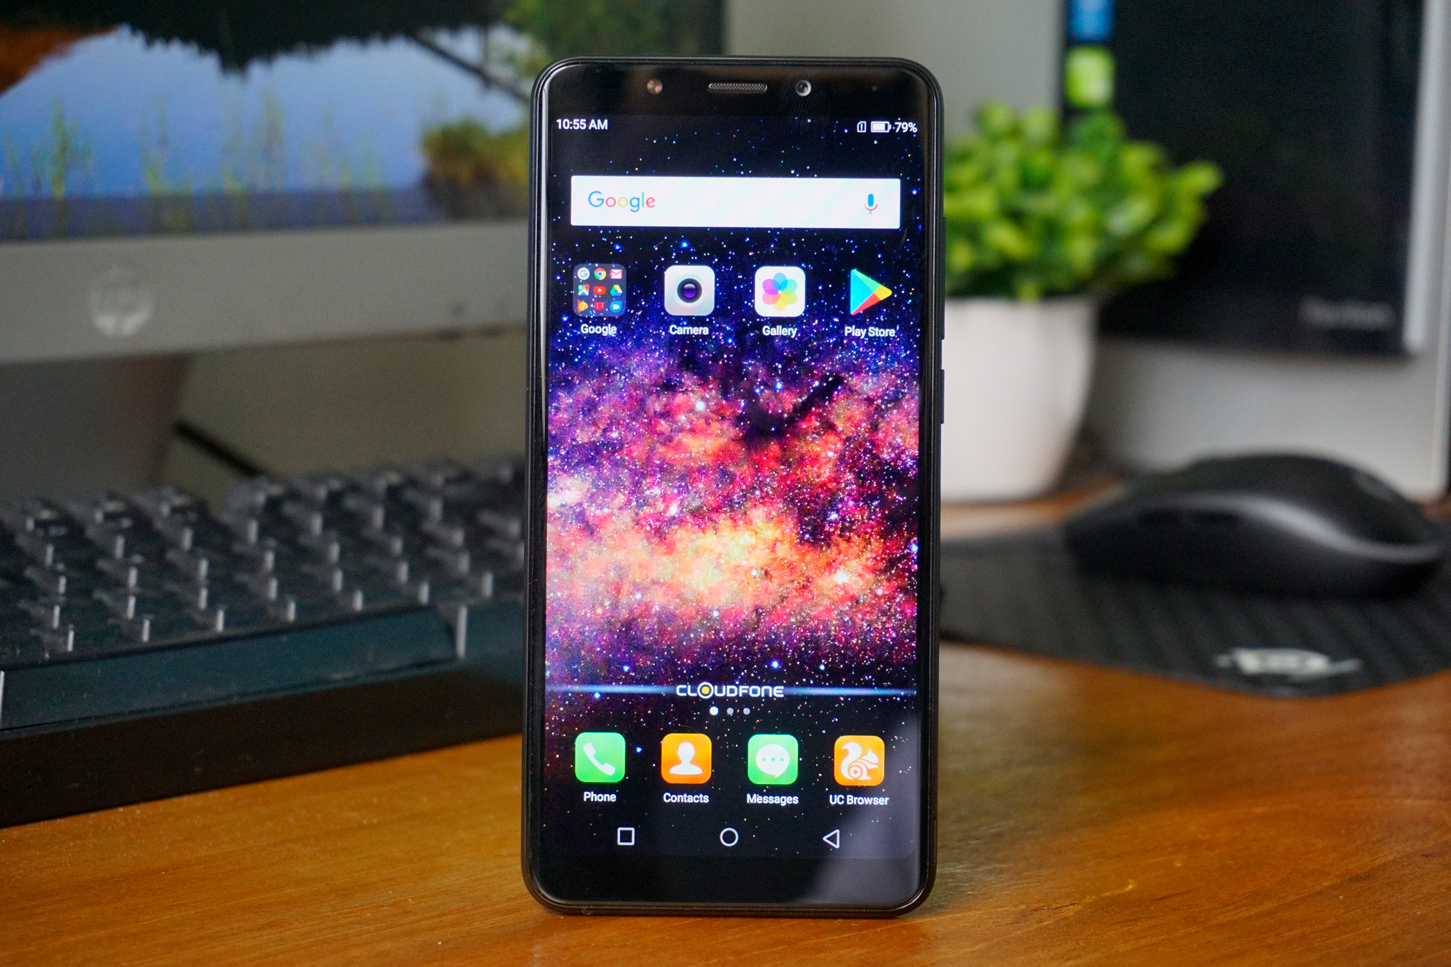 Cloudfone Next Infinity Review: The Budget Full Screen Smartphone